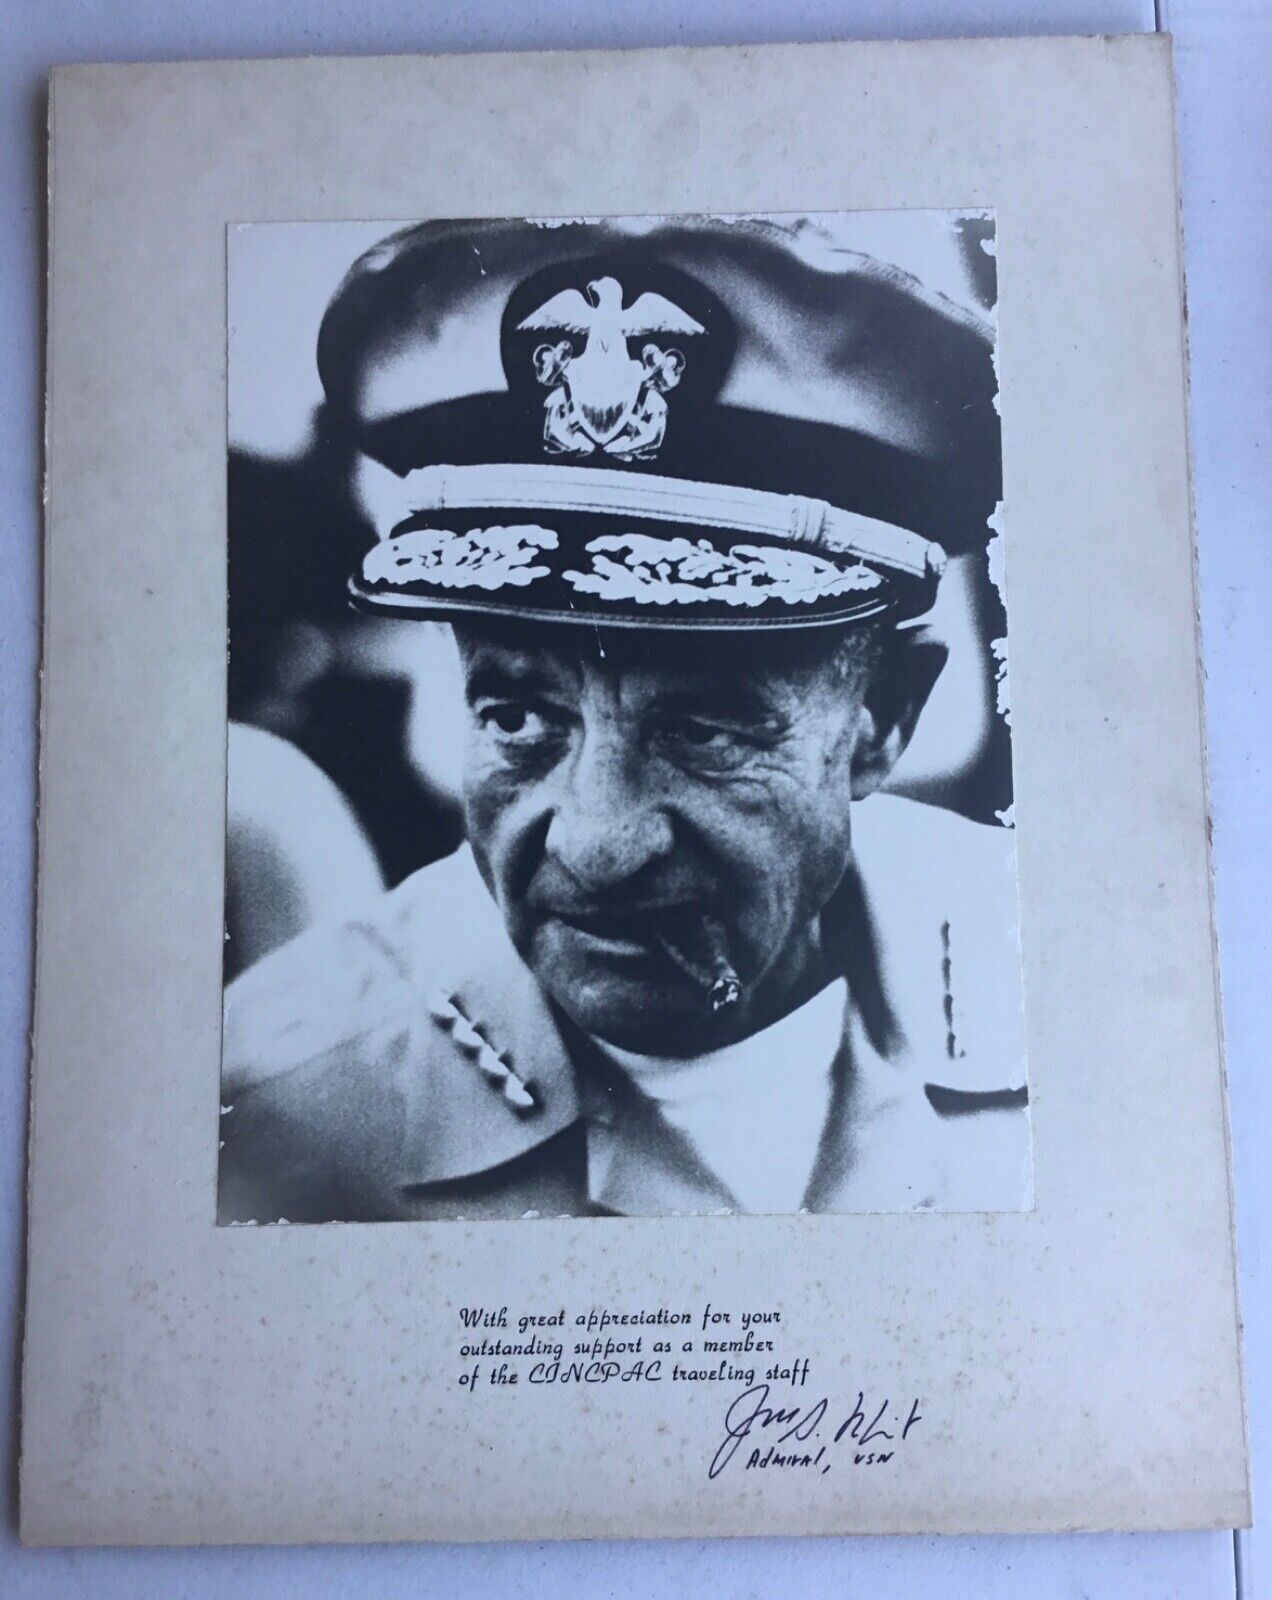 US Navy CINCPAC Commander in Chief Pacific Fleet HQ Admiral Signed Photo B&W